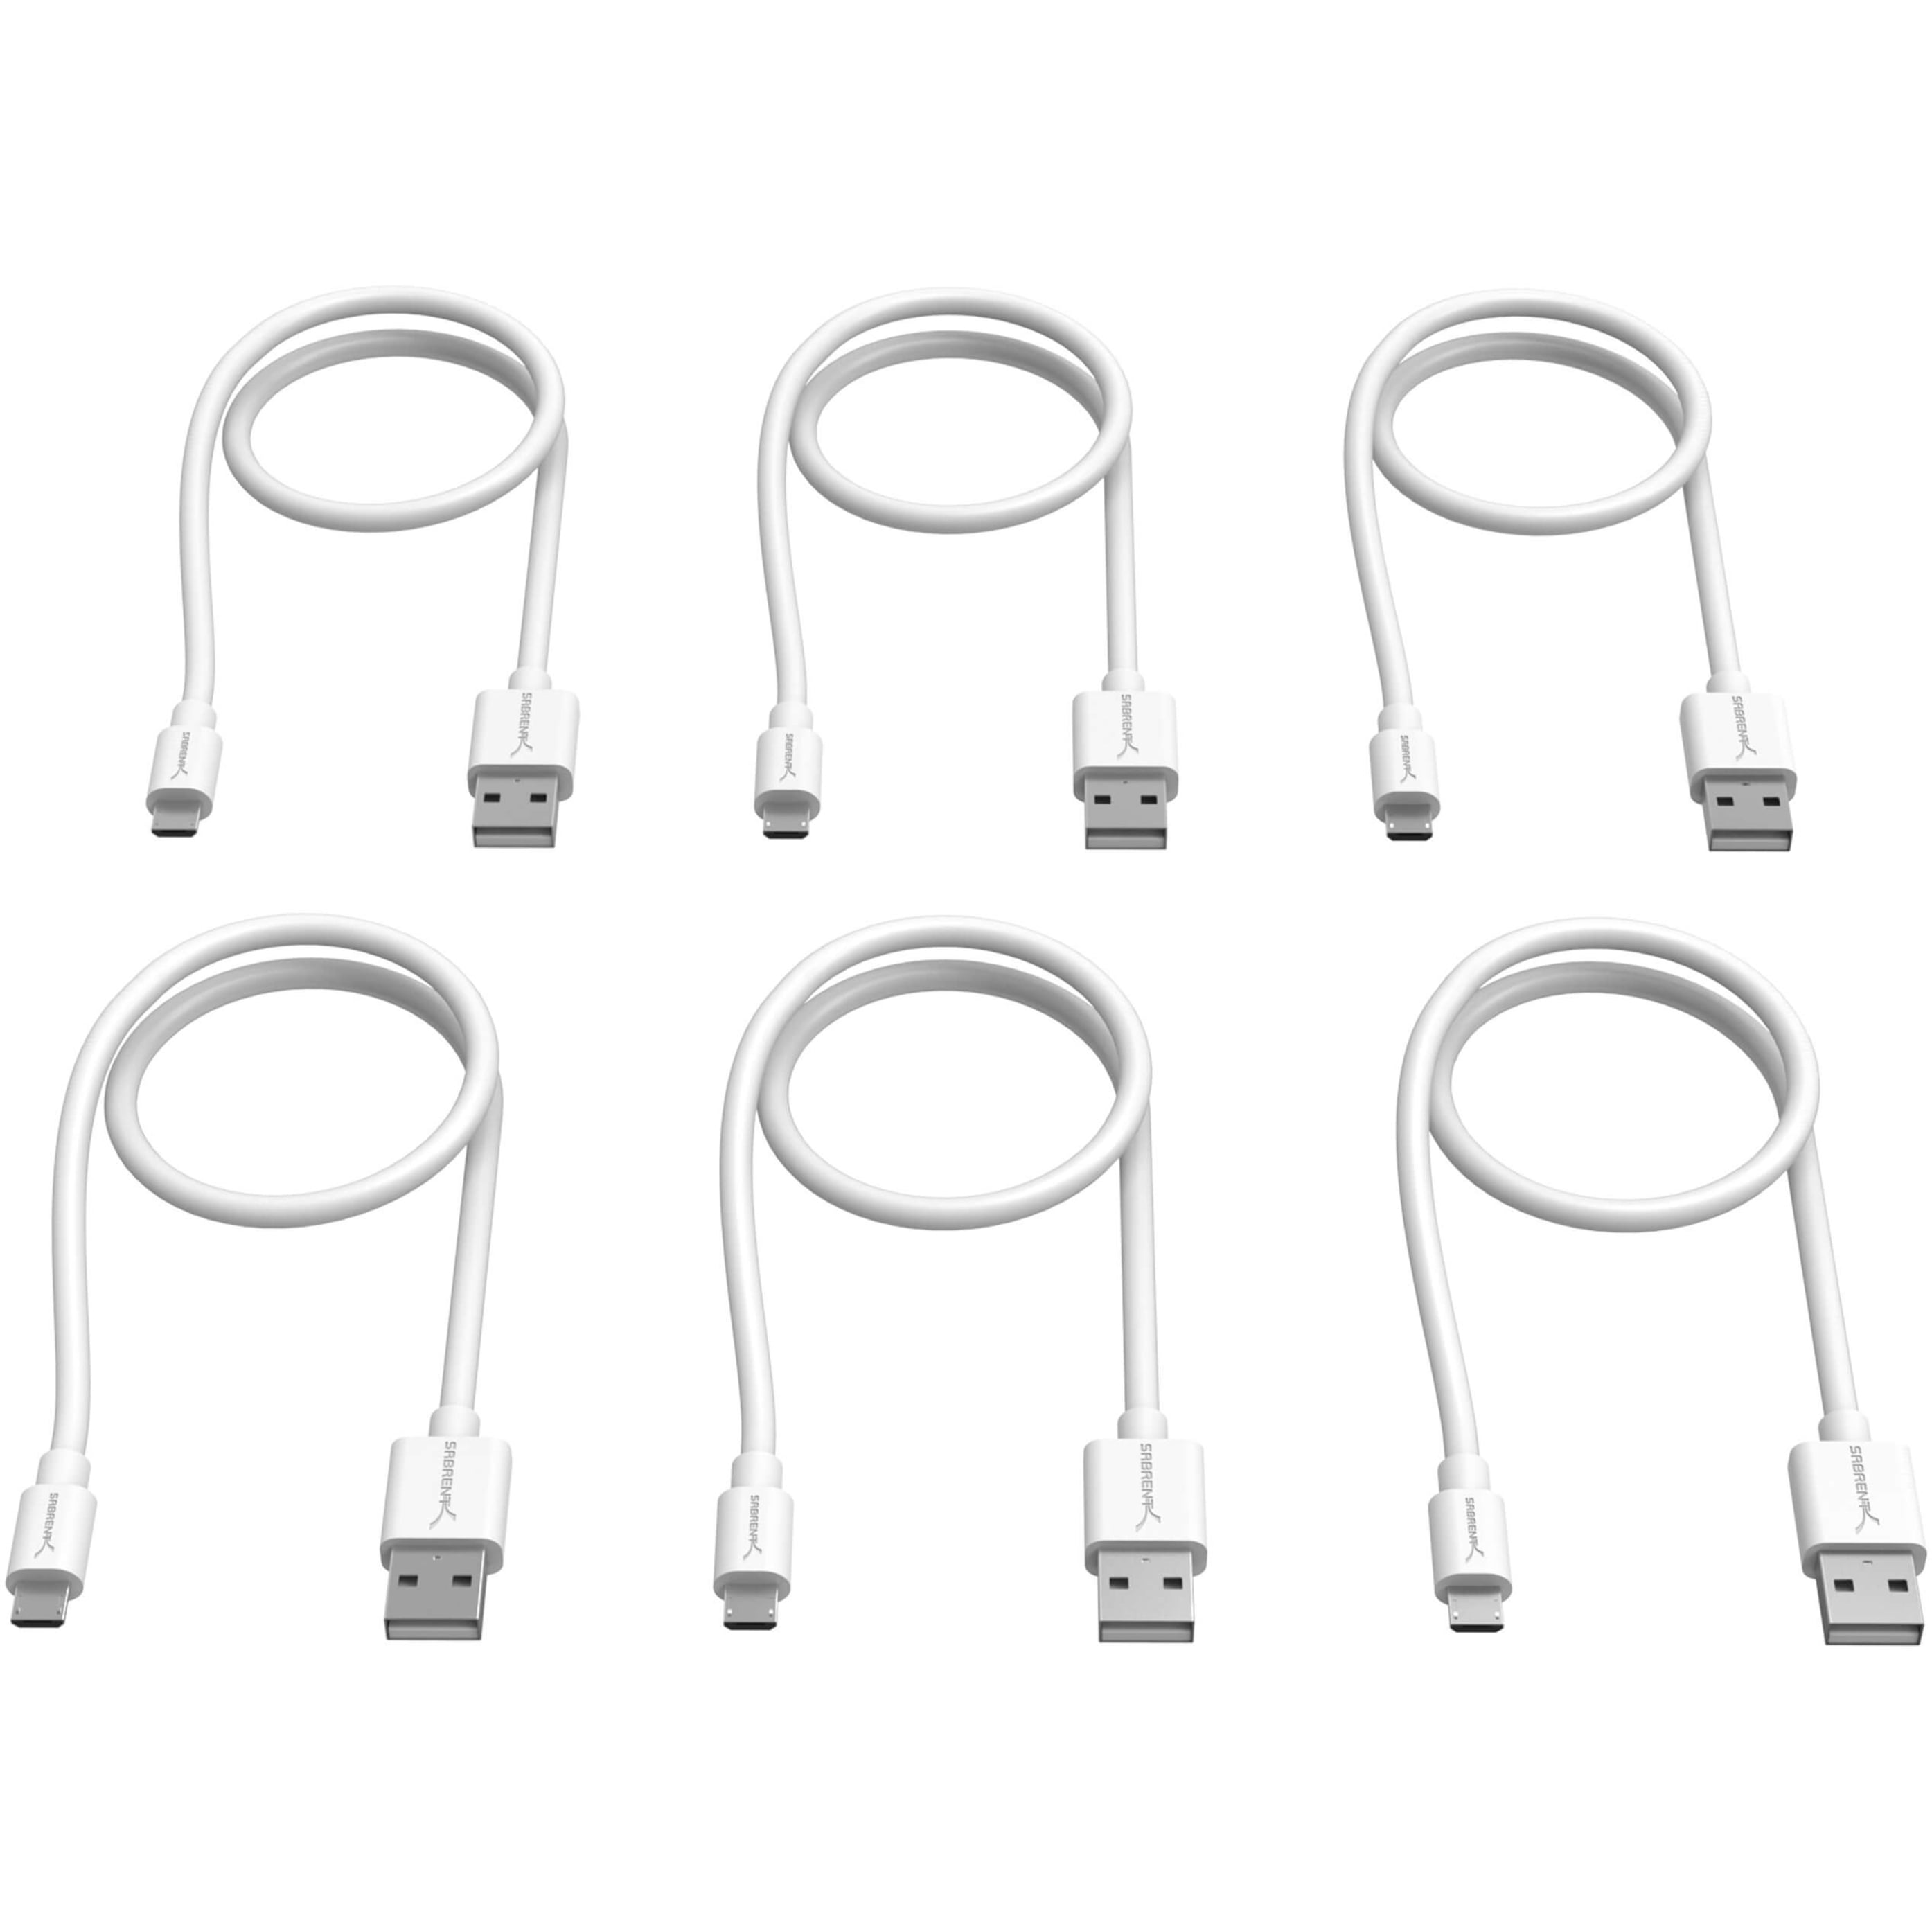 6-Pack] 22AWG Premium 3ft Micro USB Cables High Speed USB 2.0 A Male -  Sabrent